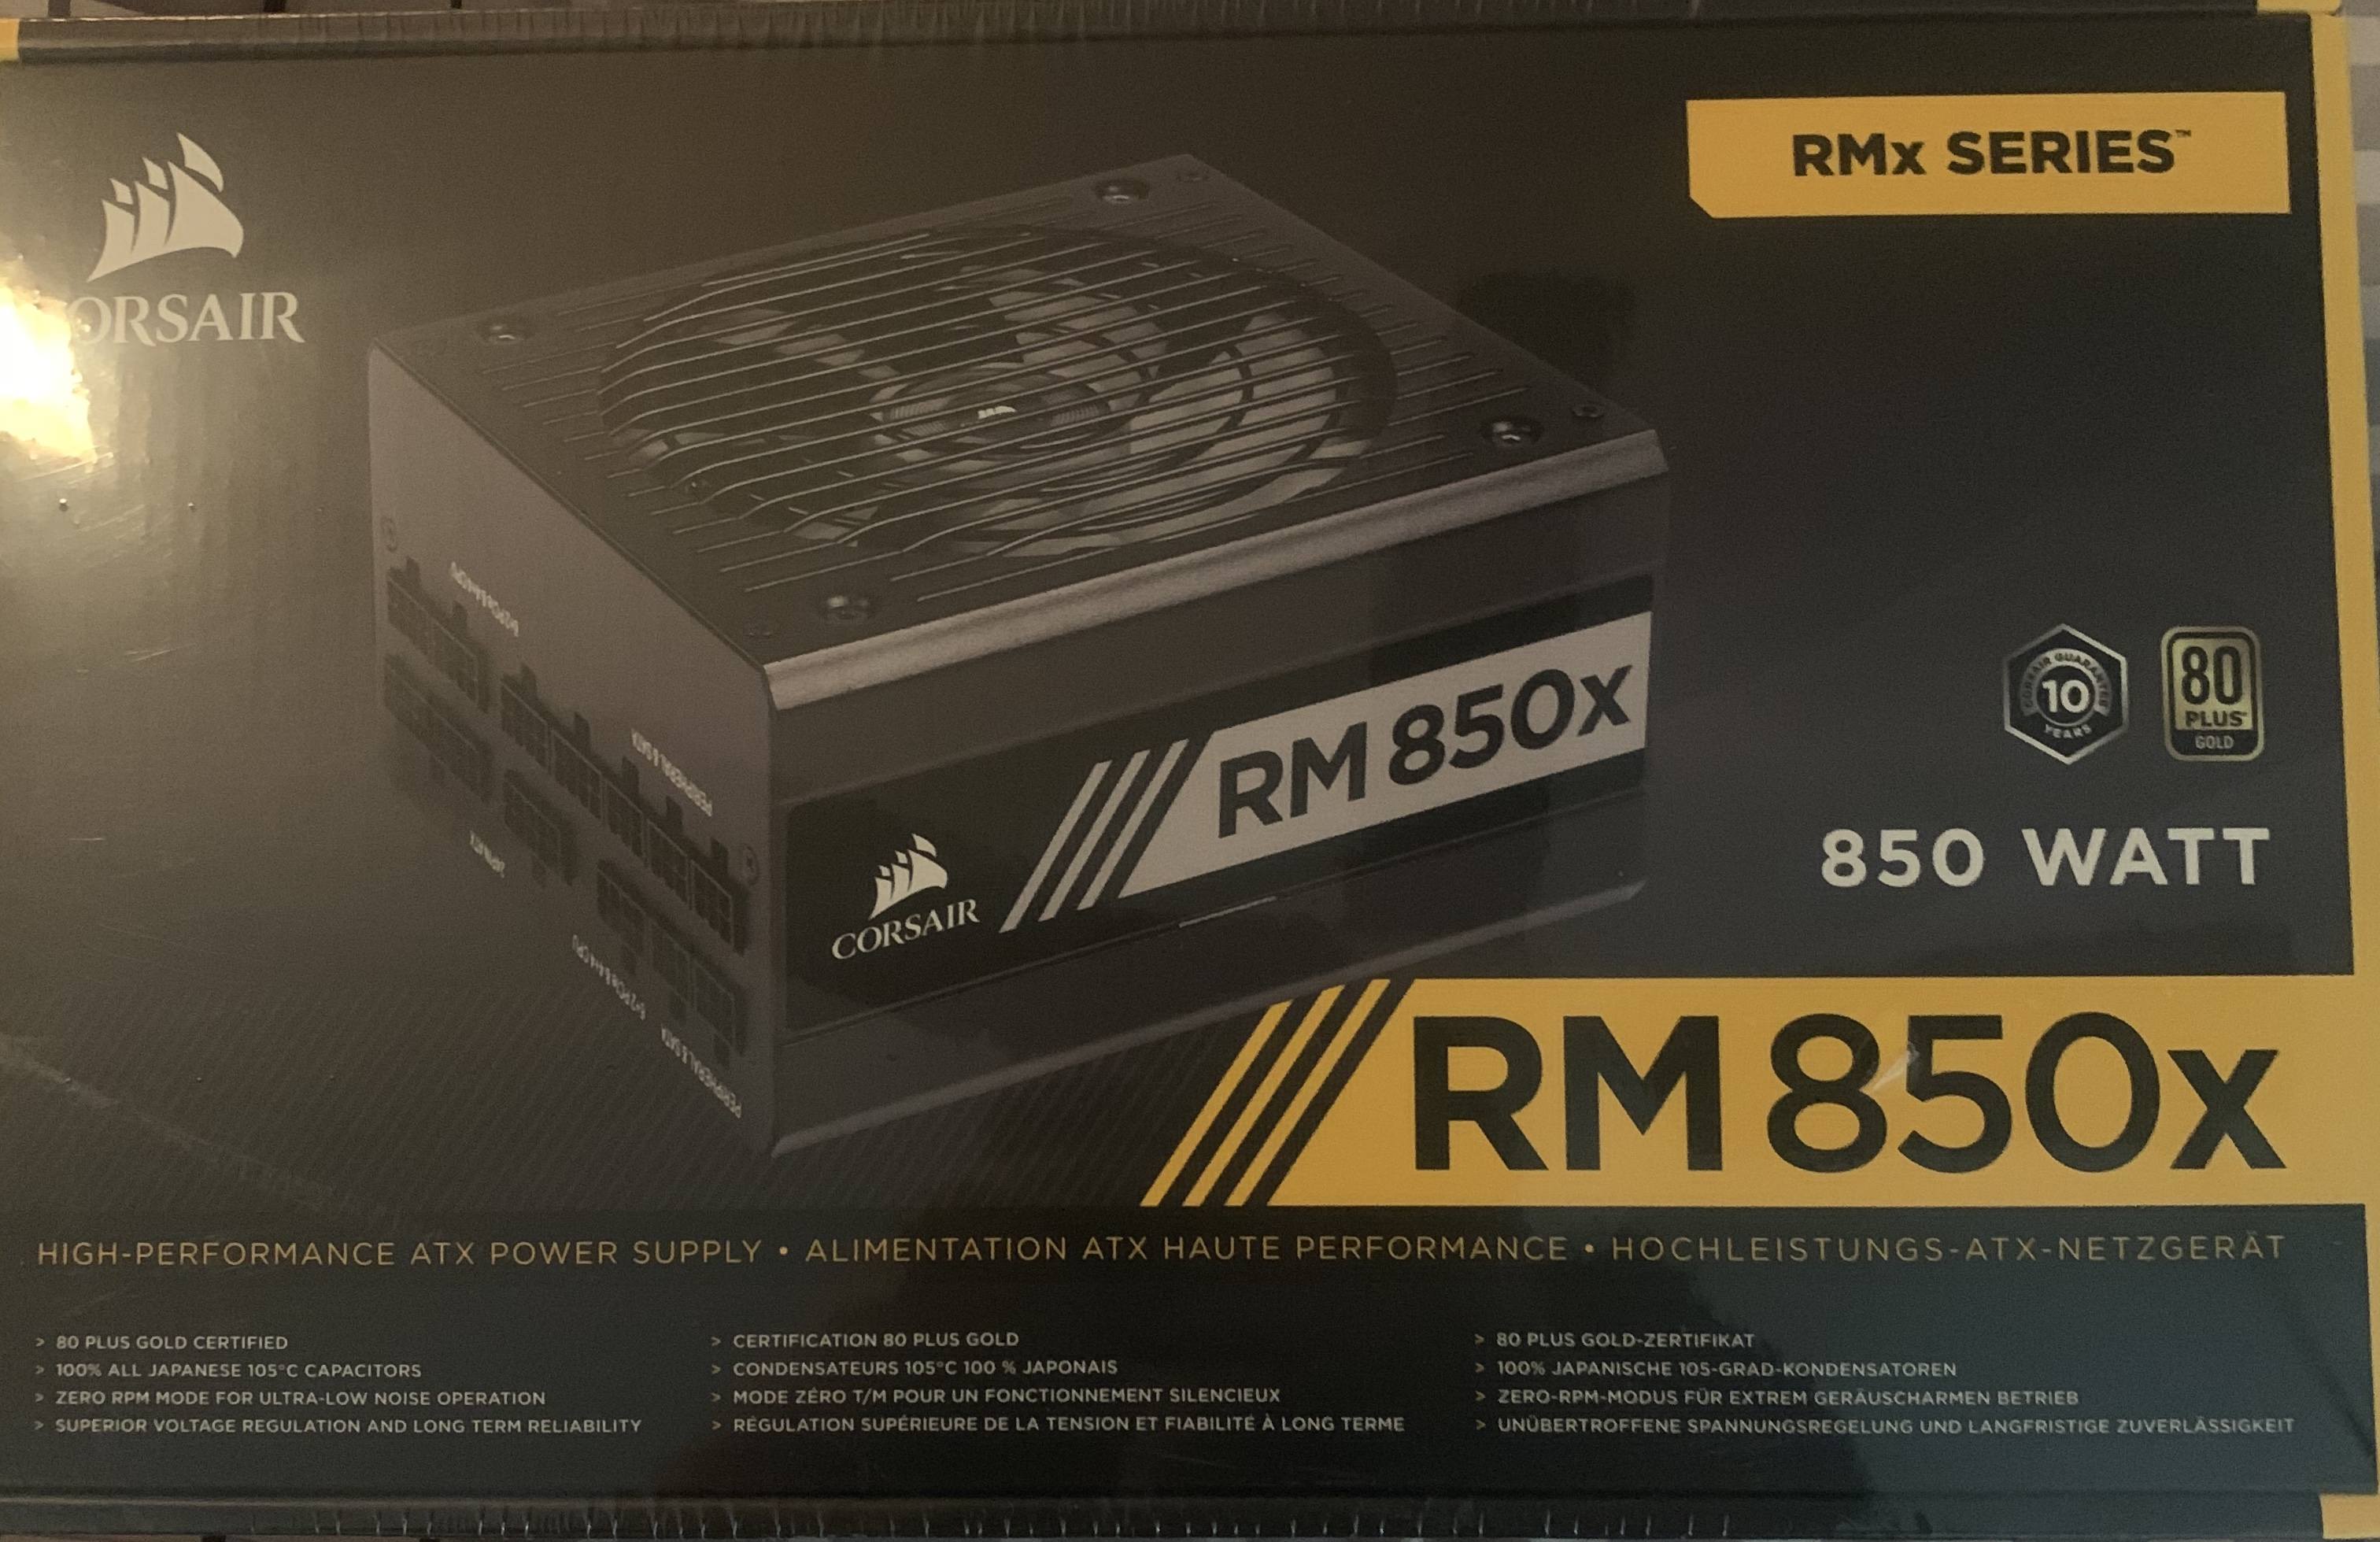 Has anyone ever used this Corsair PSU? Is it one I can trust